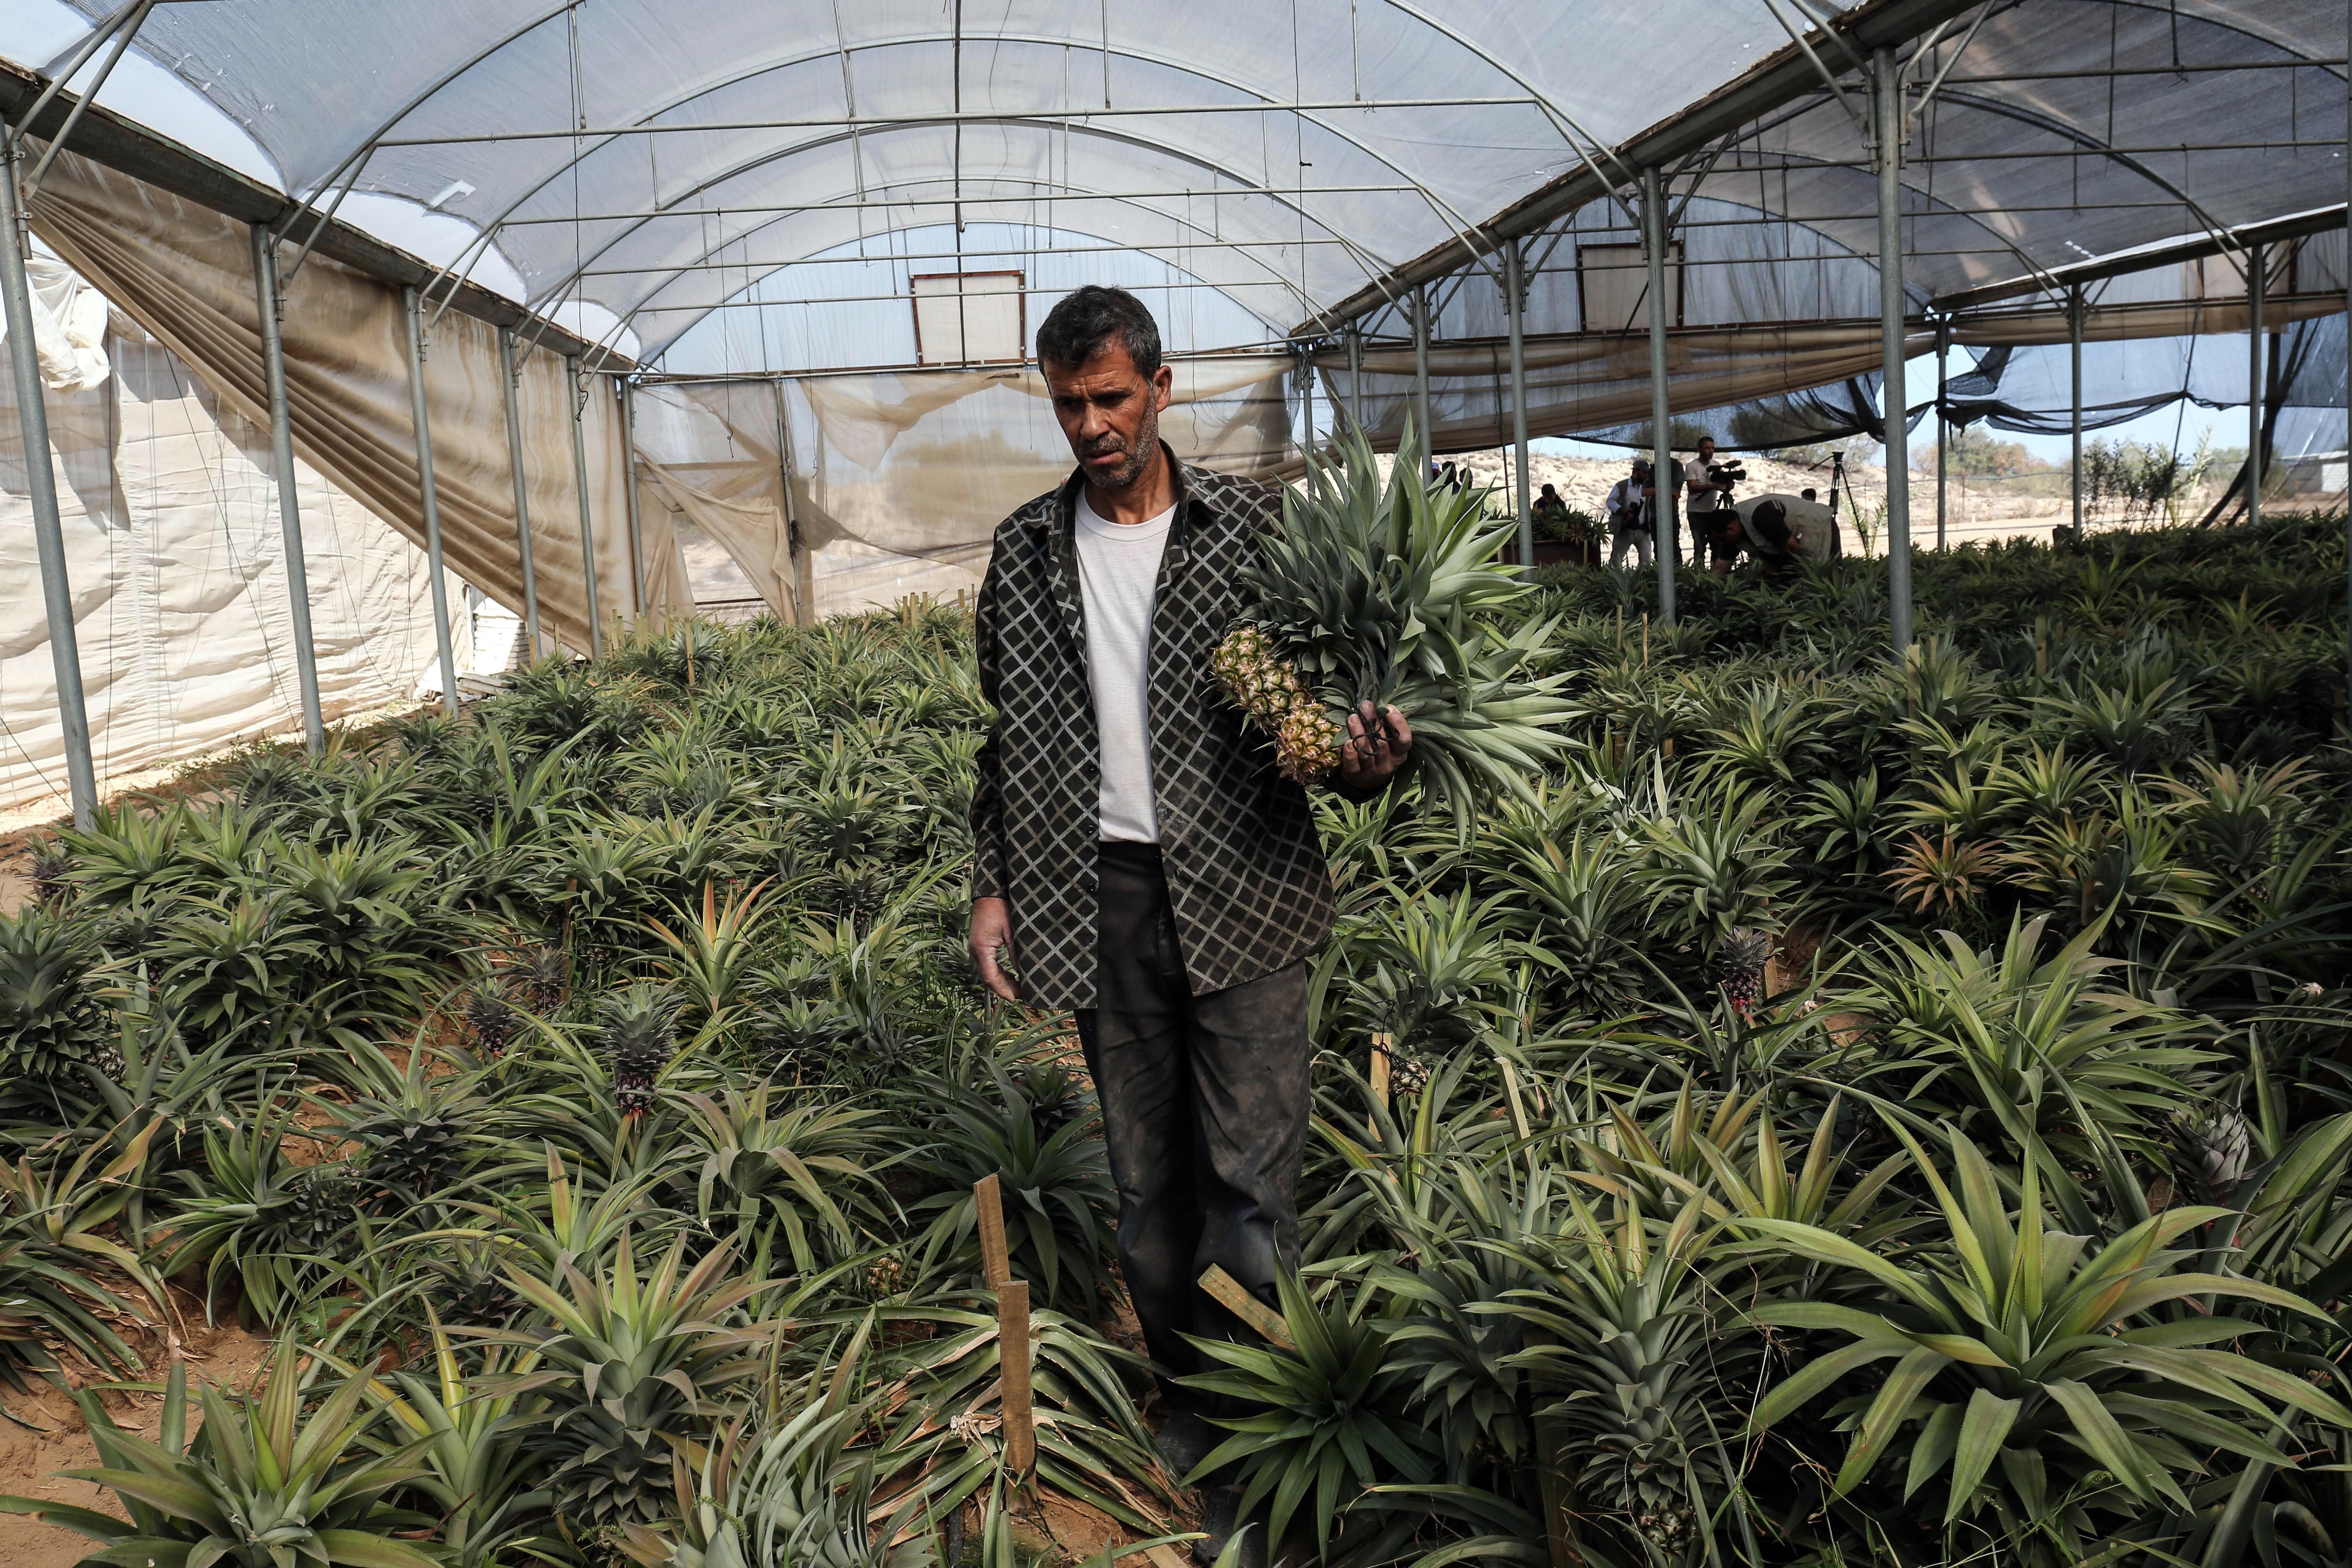 A Palestinian man picks pineapples during a harvest at a farm in Khan Yunis, in the southern Gaza Strip on November 9, 2017. According to the Union of Agricultural Work Committees, this is the first time in the past decade that pineapples have been successfully cultivated in the Gaza Strip.